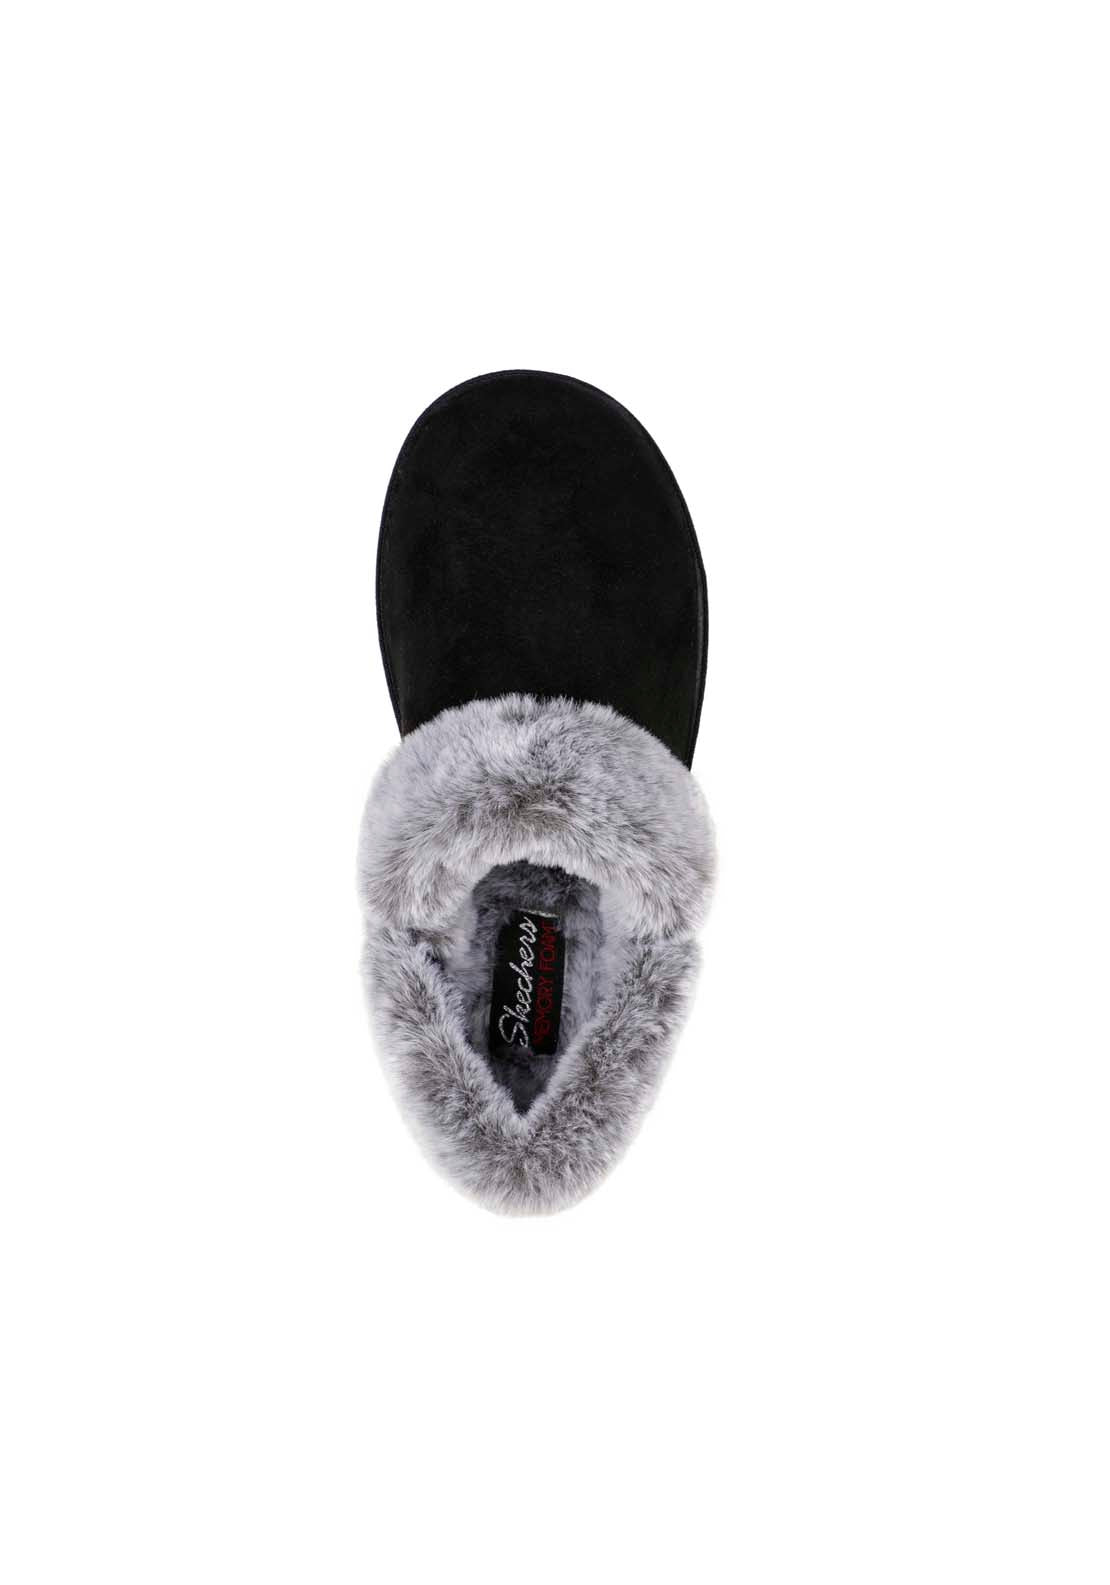 Skechers Cosy Campfire Slipper - Black 2 Shaws Department Stores